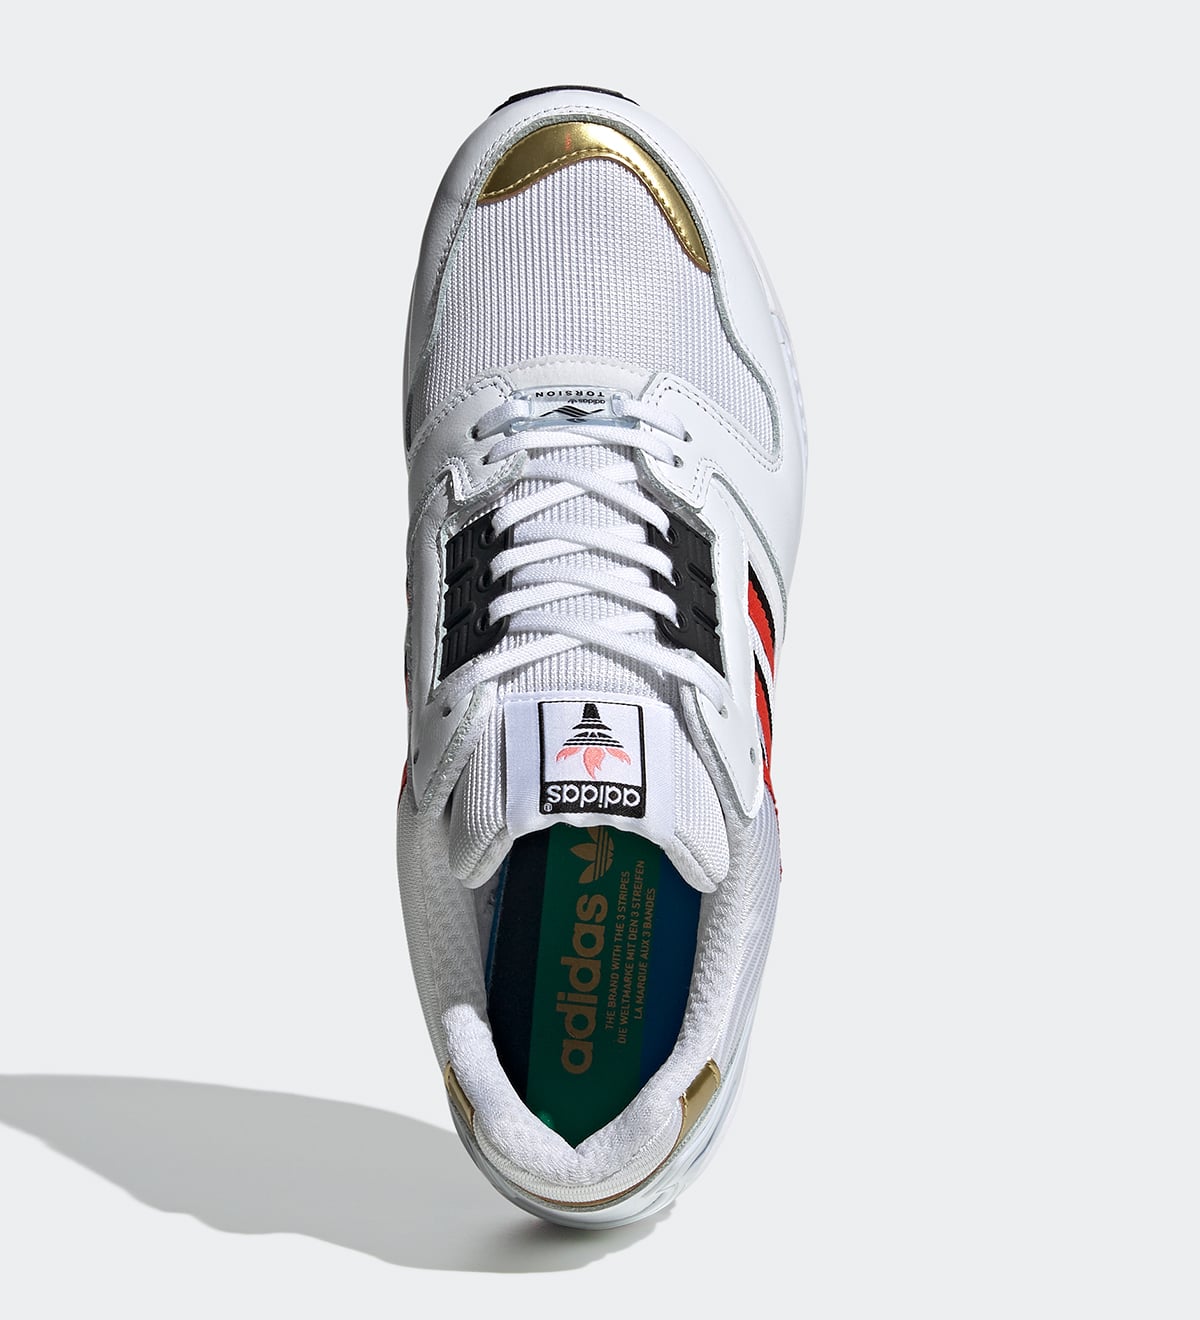 adidas ZX 8000 “Olympic” Arrives This April | House of Heat°